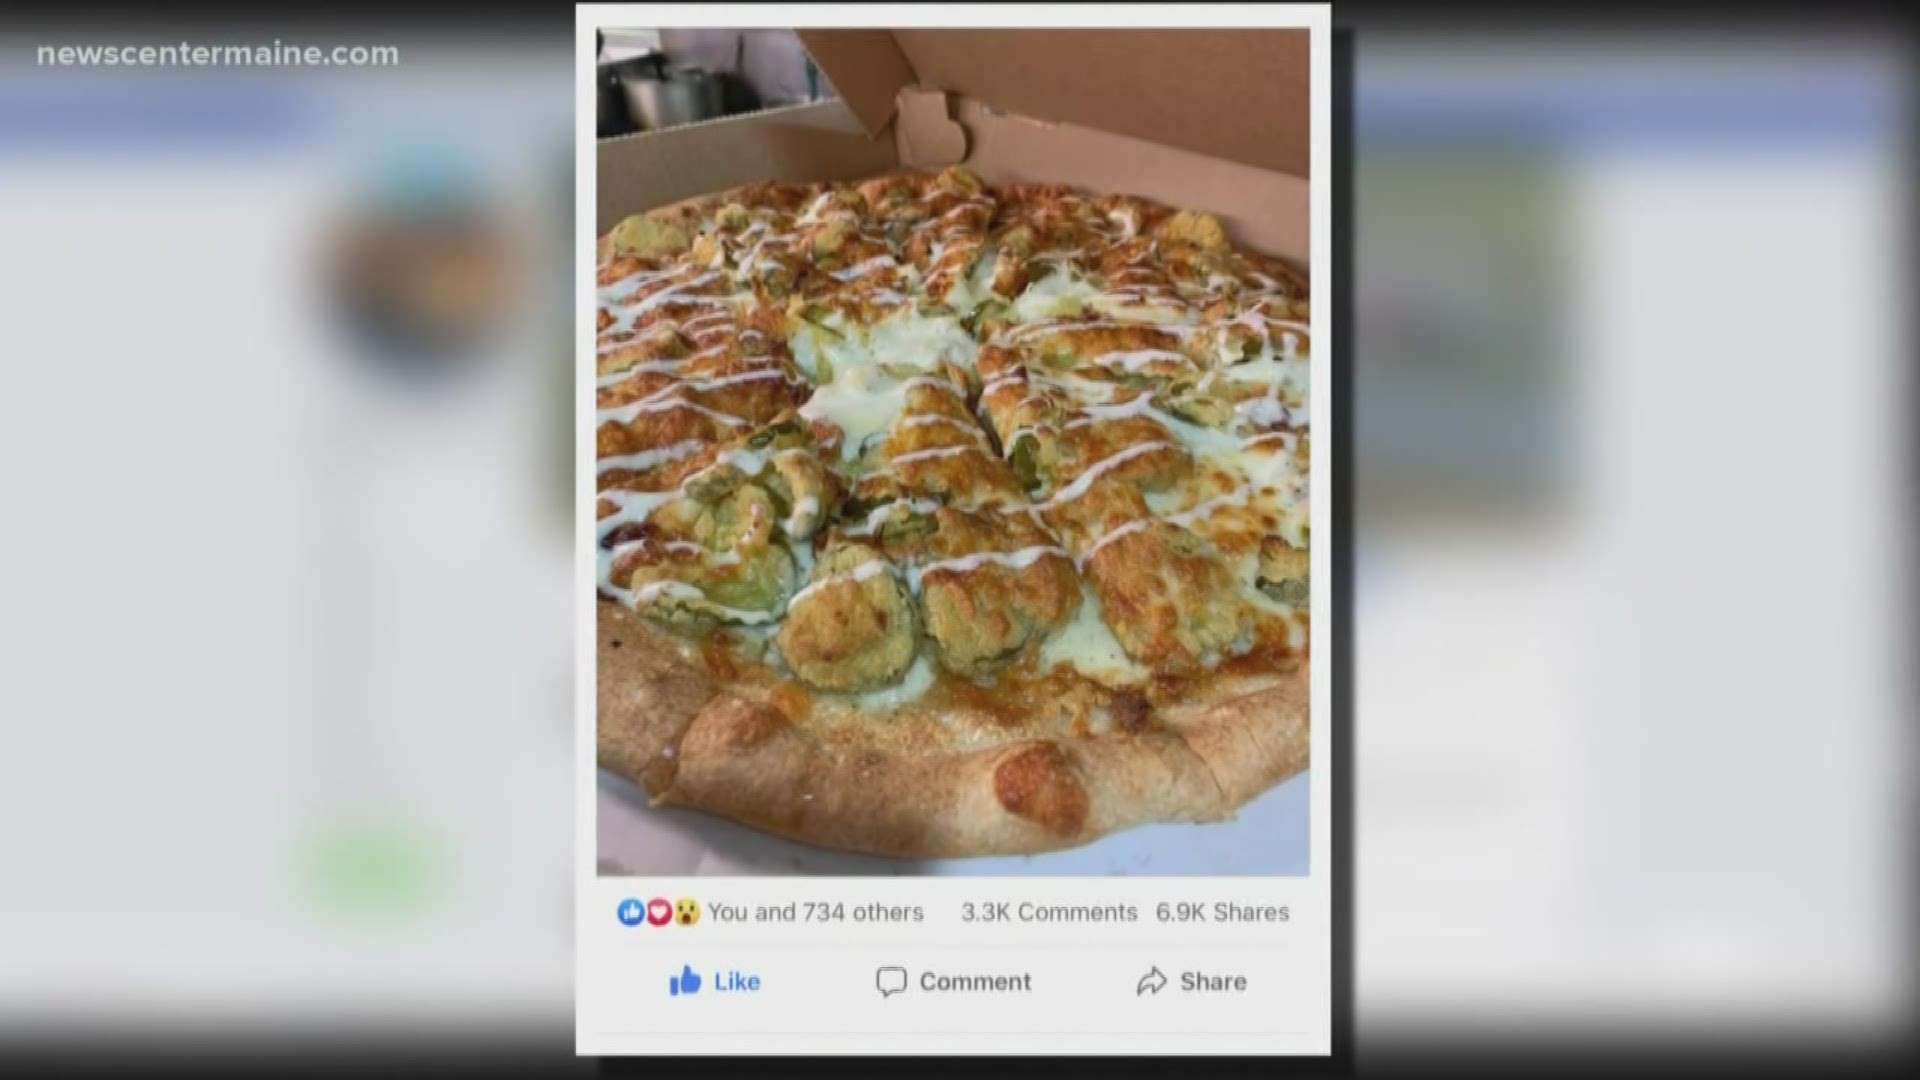 Fairgrounds Pub's photo of  pickle pizza goes viral